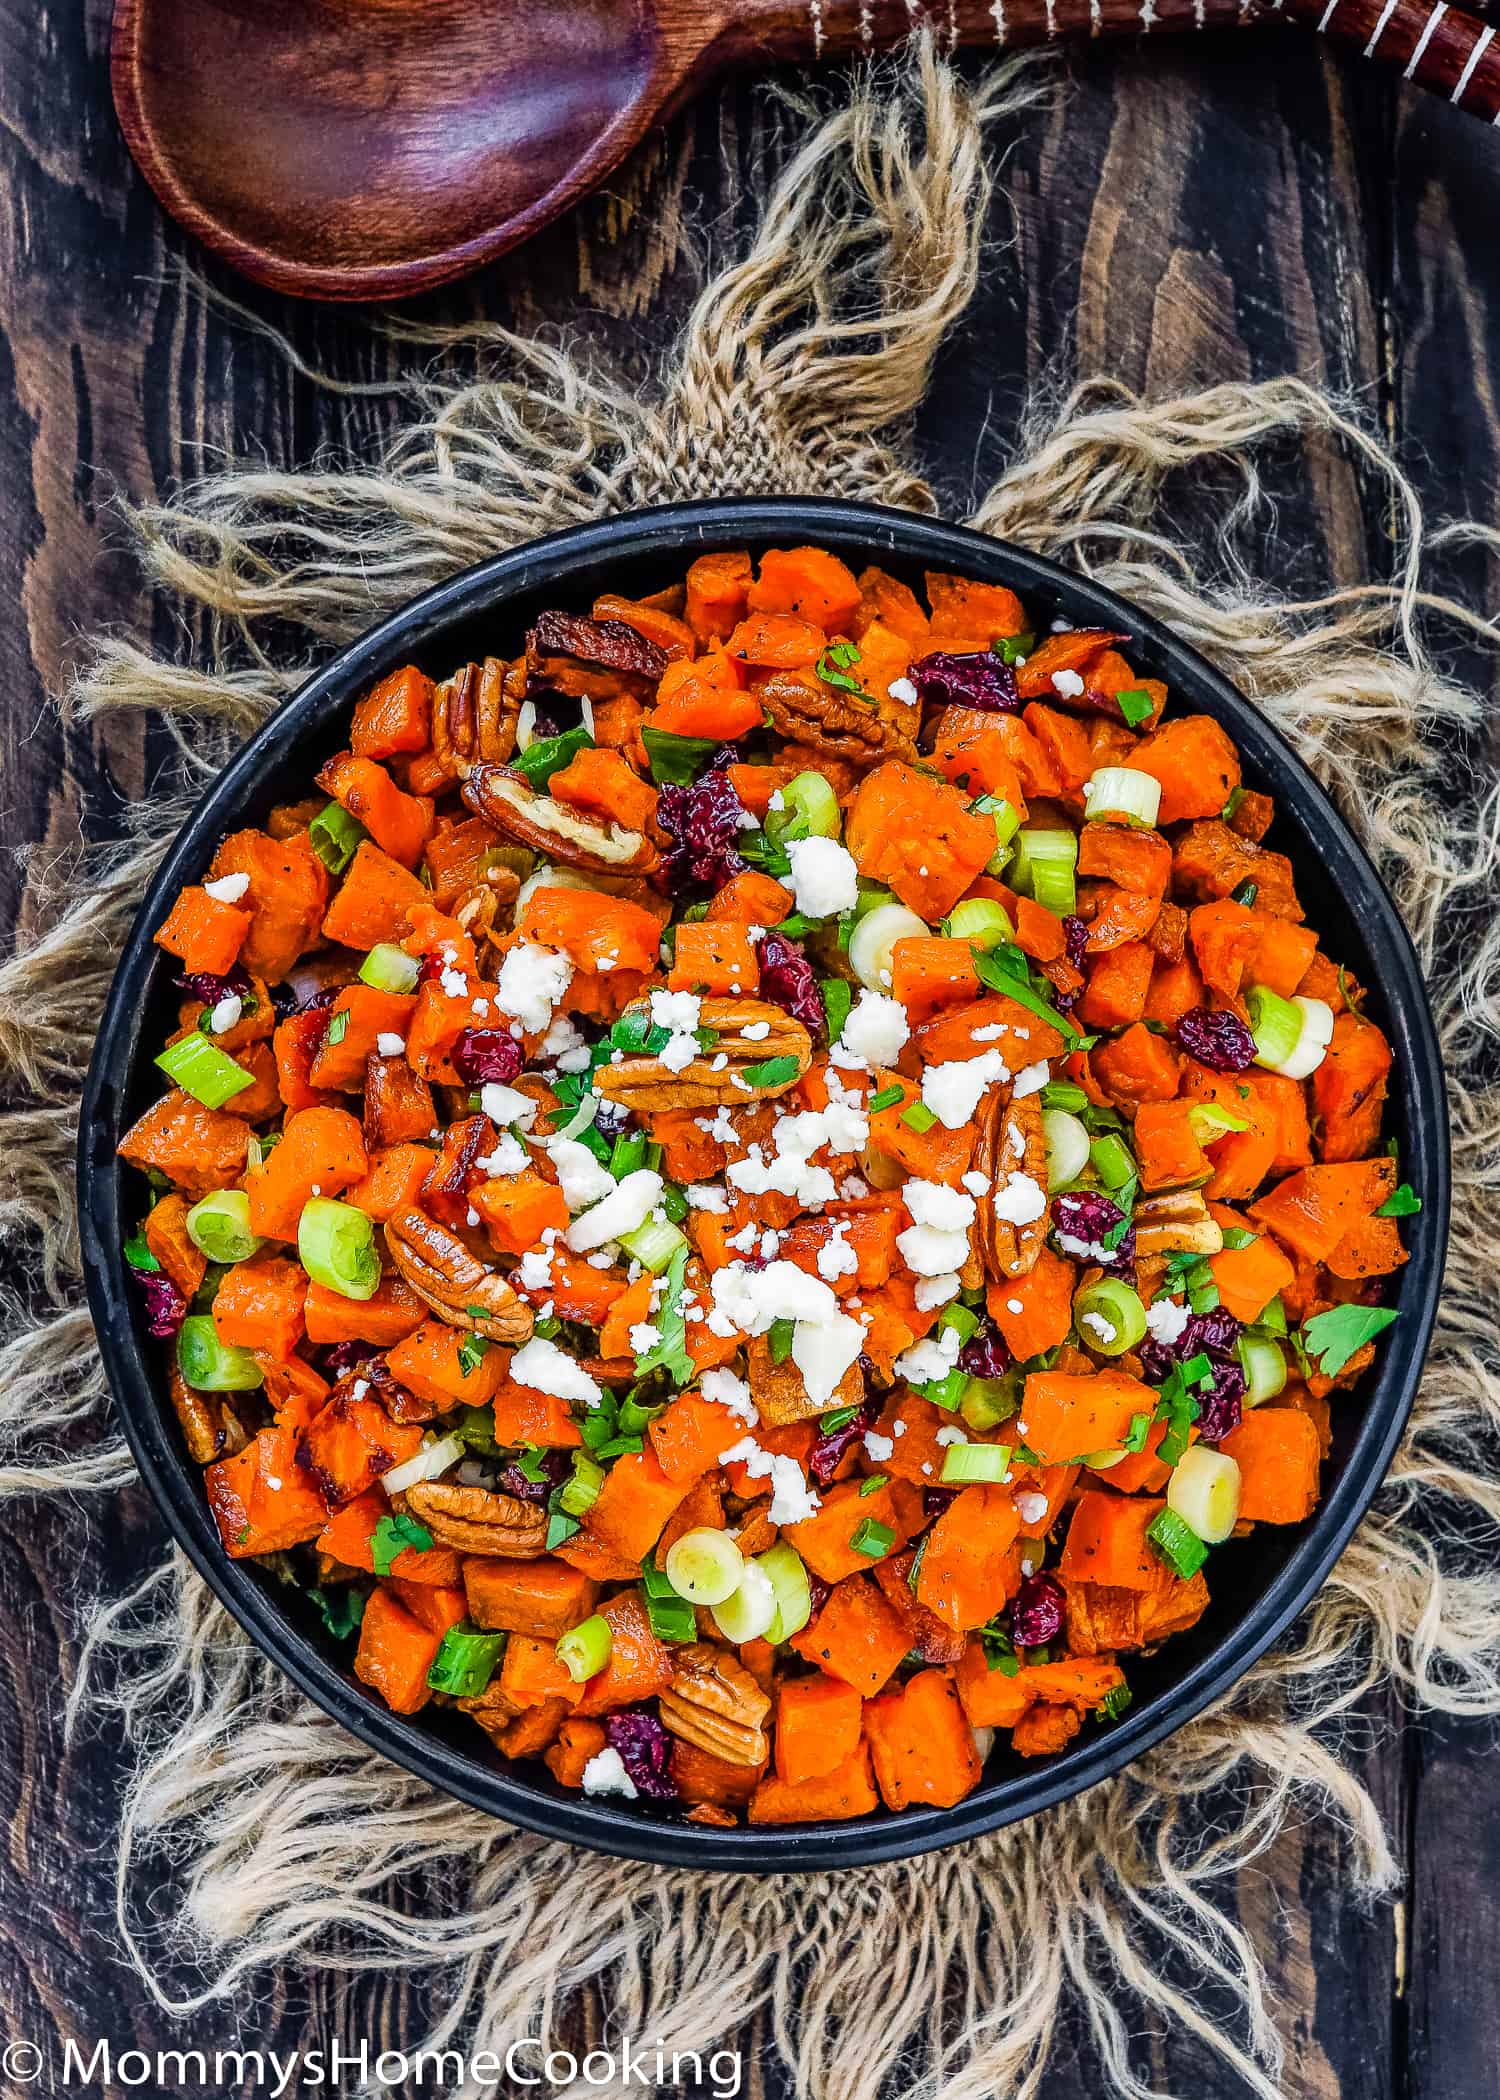 Roasted Sweet Potato and Cranberry Salad in a black serving bowl over a wooden surface.